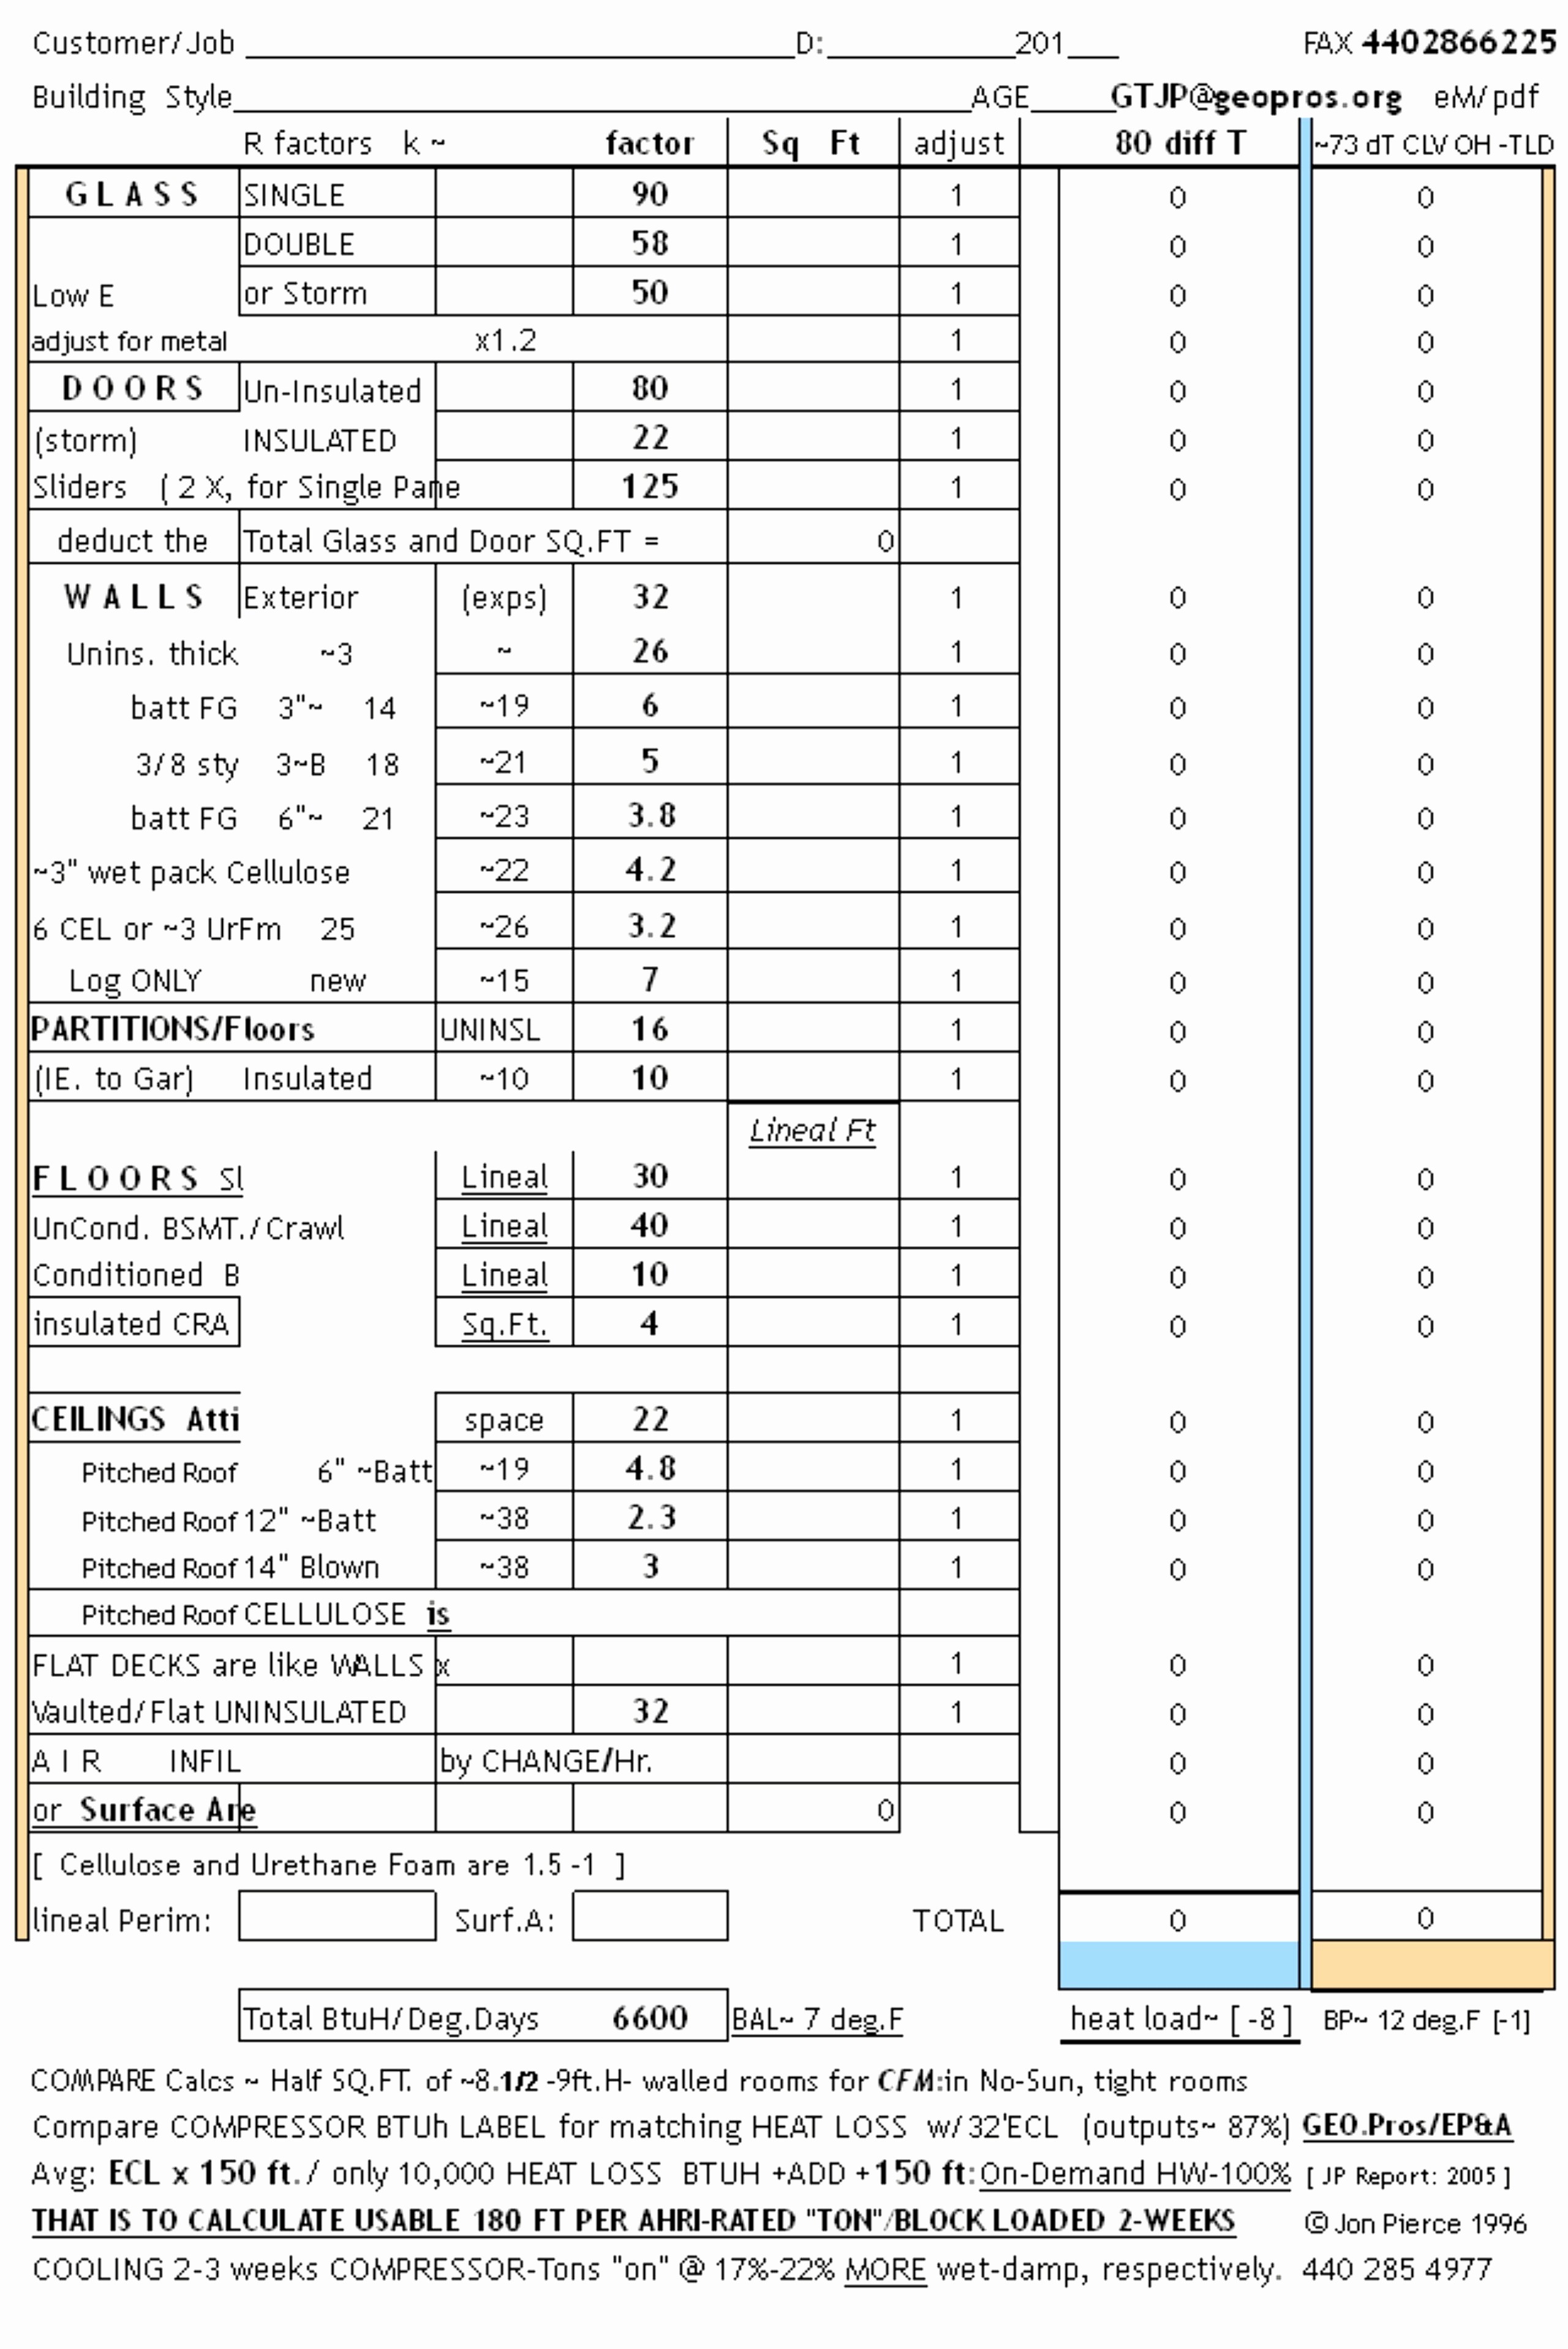 commercial electrical load calculation worksheet pdf